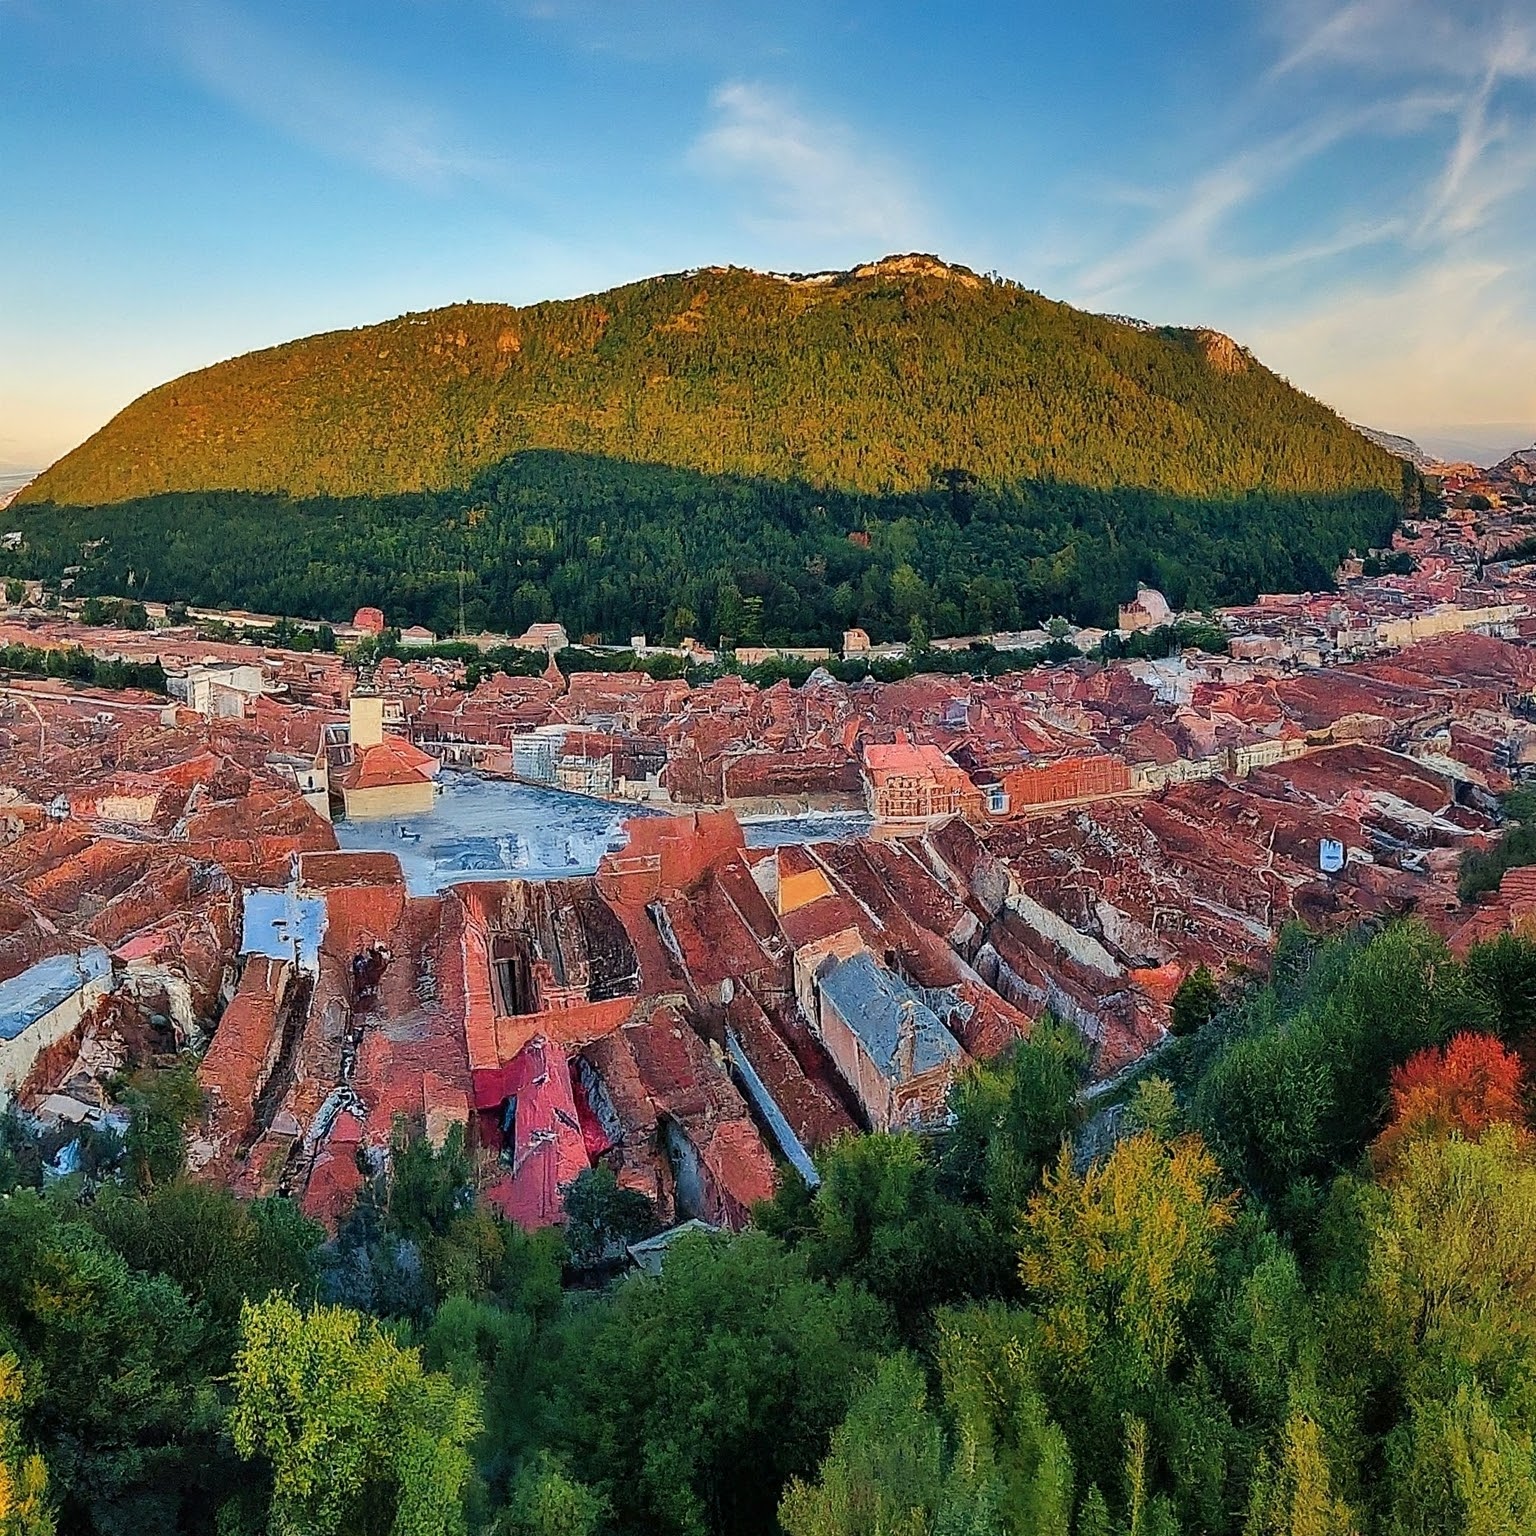 Panoramic view of Brasov, Romania, with colorful houses and Tâmpa mountain.